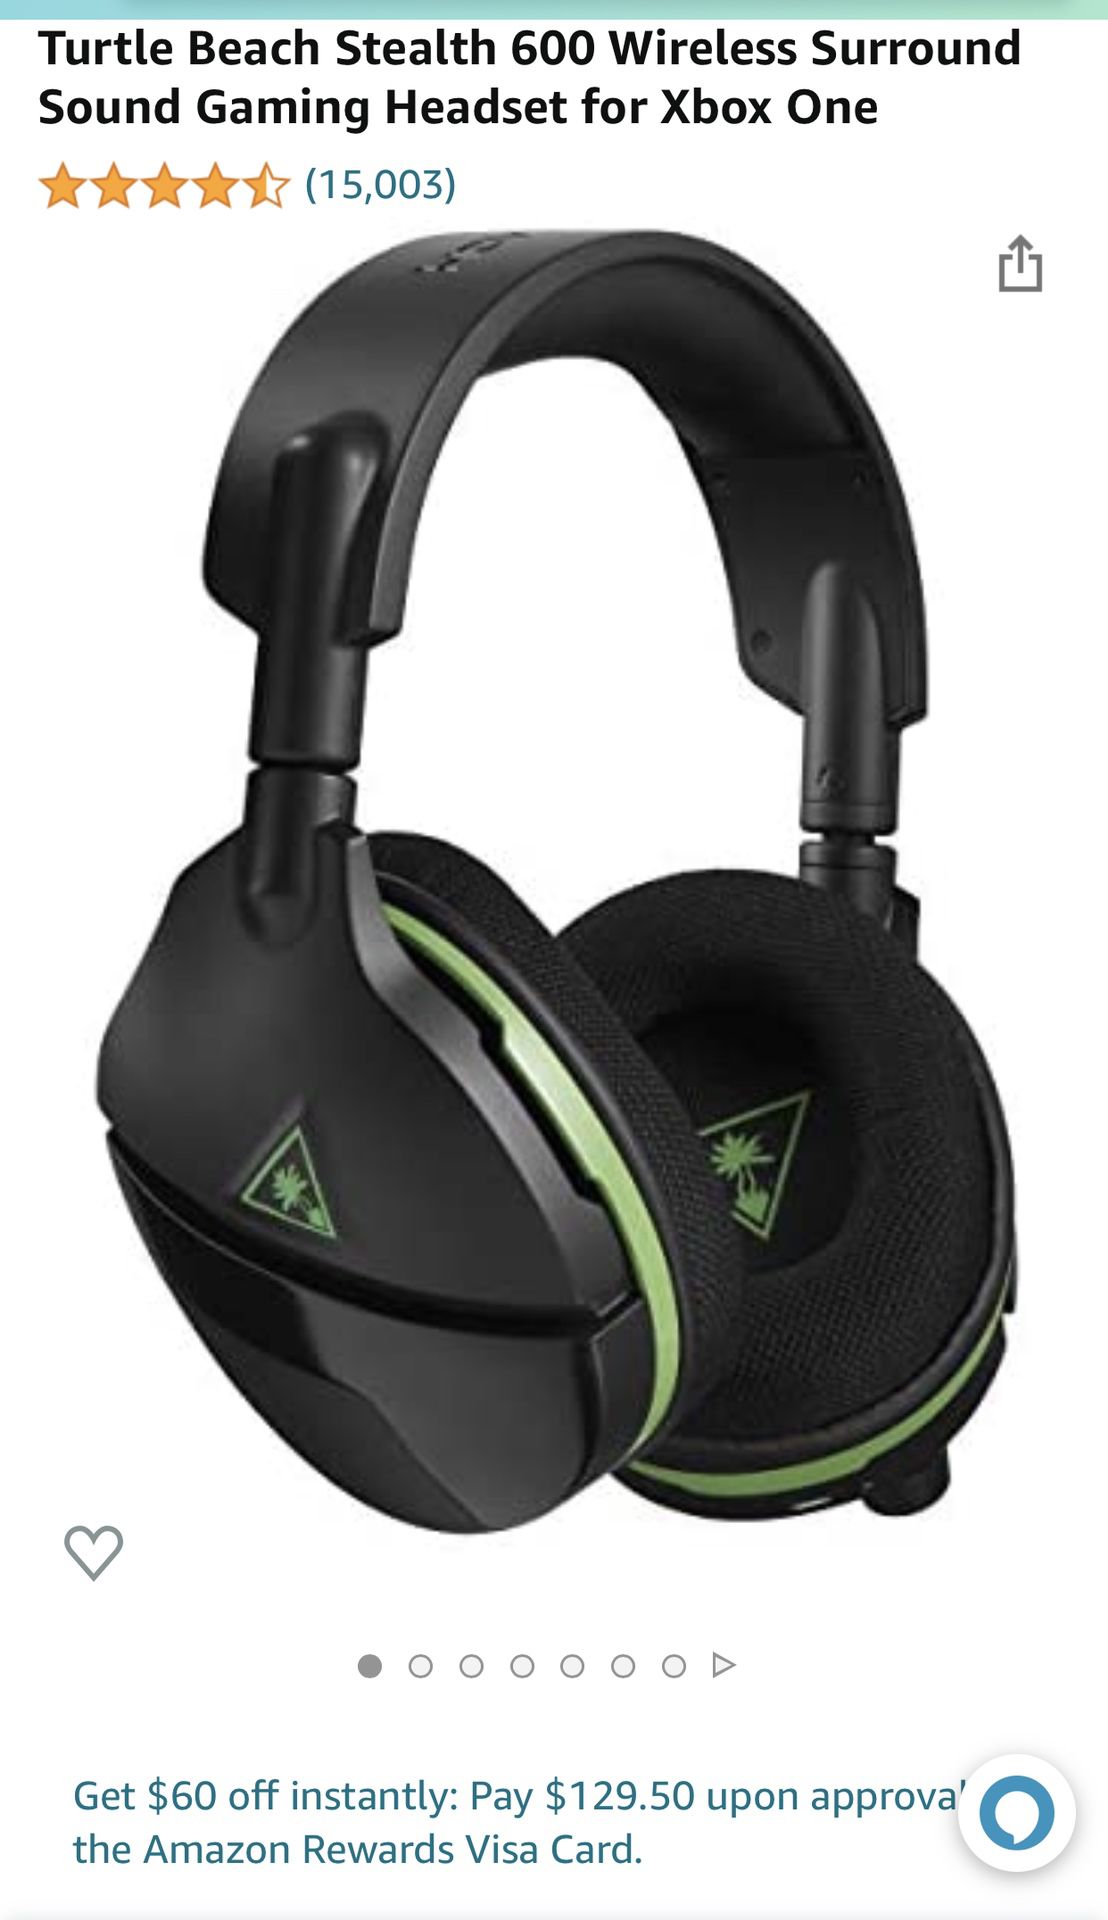  Turtle Beach Stealth 600 Wireless Surround Sound Gaming Headset for Xbox One